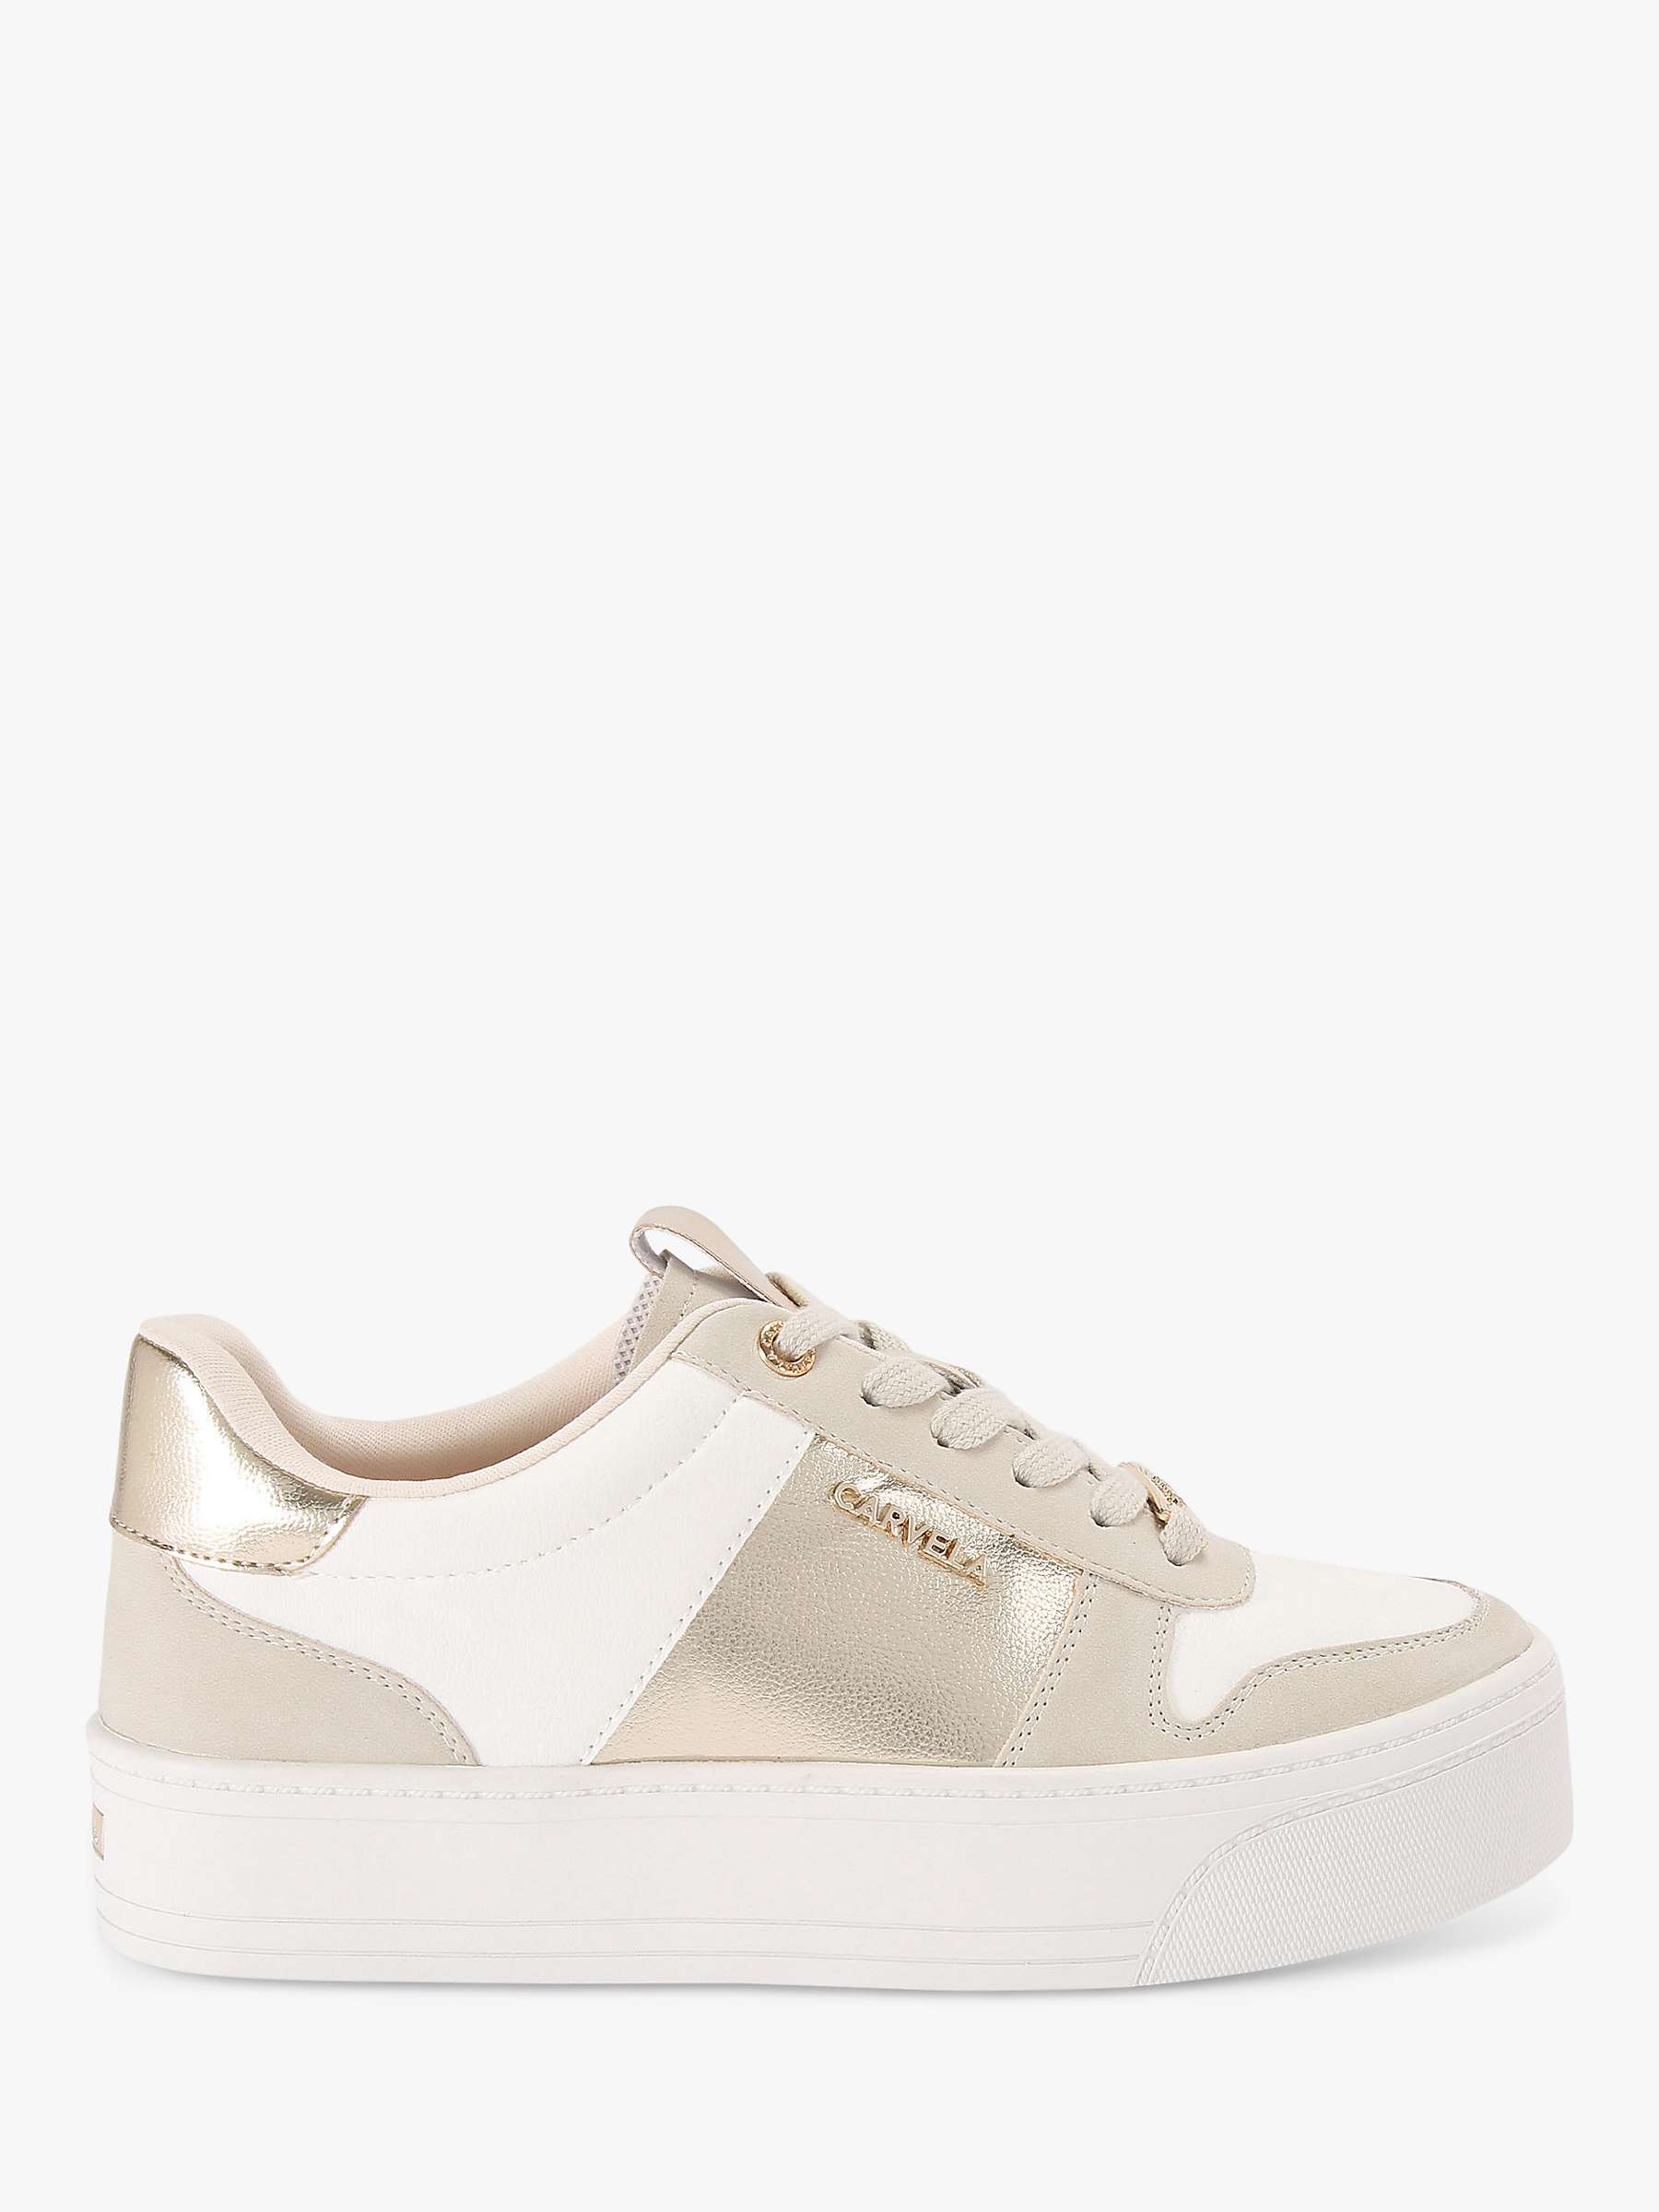 Buy Carvela Relay Metallic Lace Up Trainers, White/Multi Online at johnlewis.com